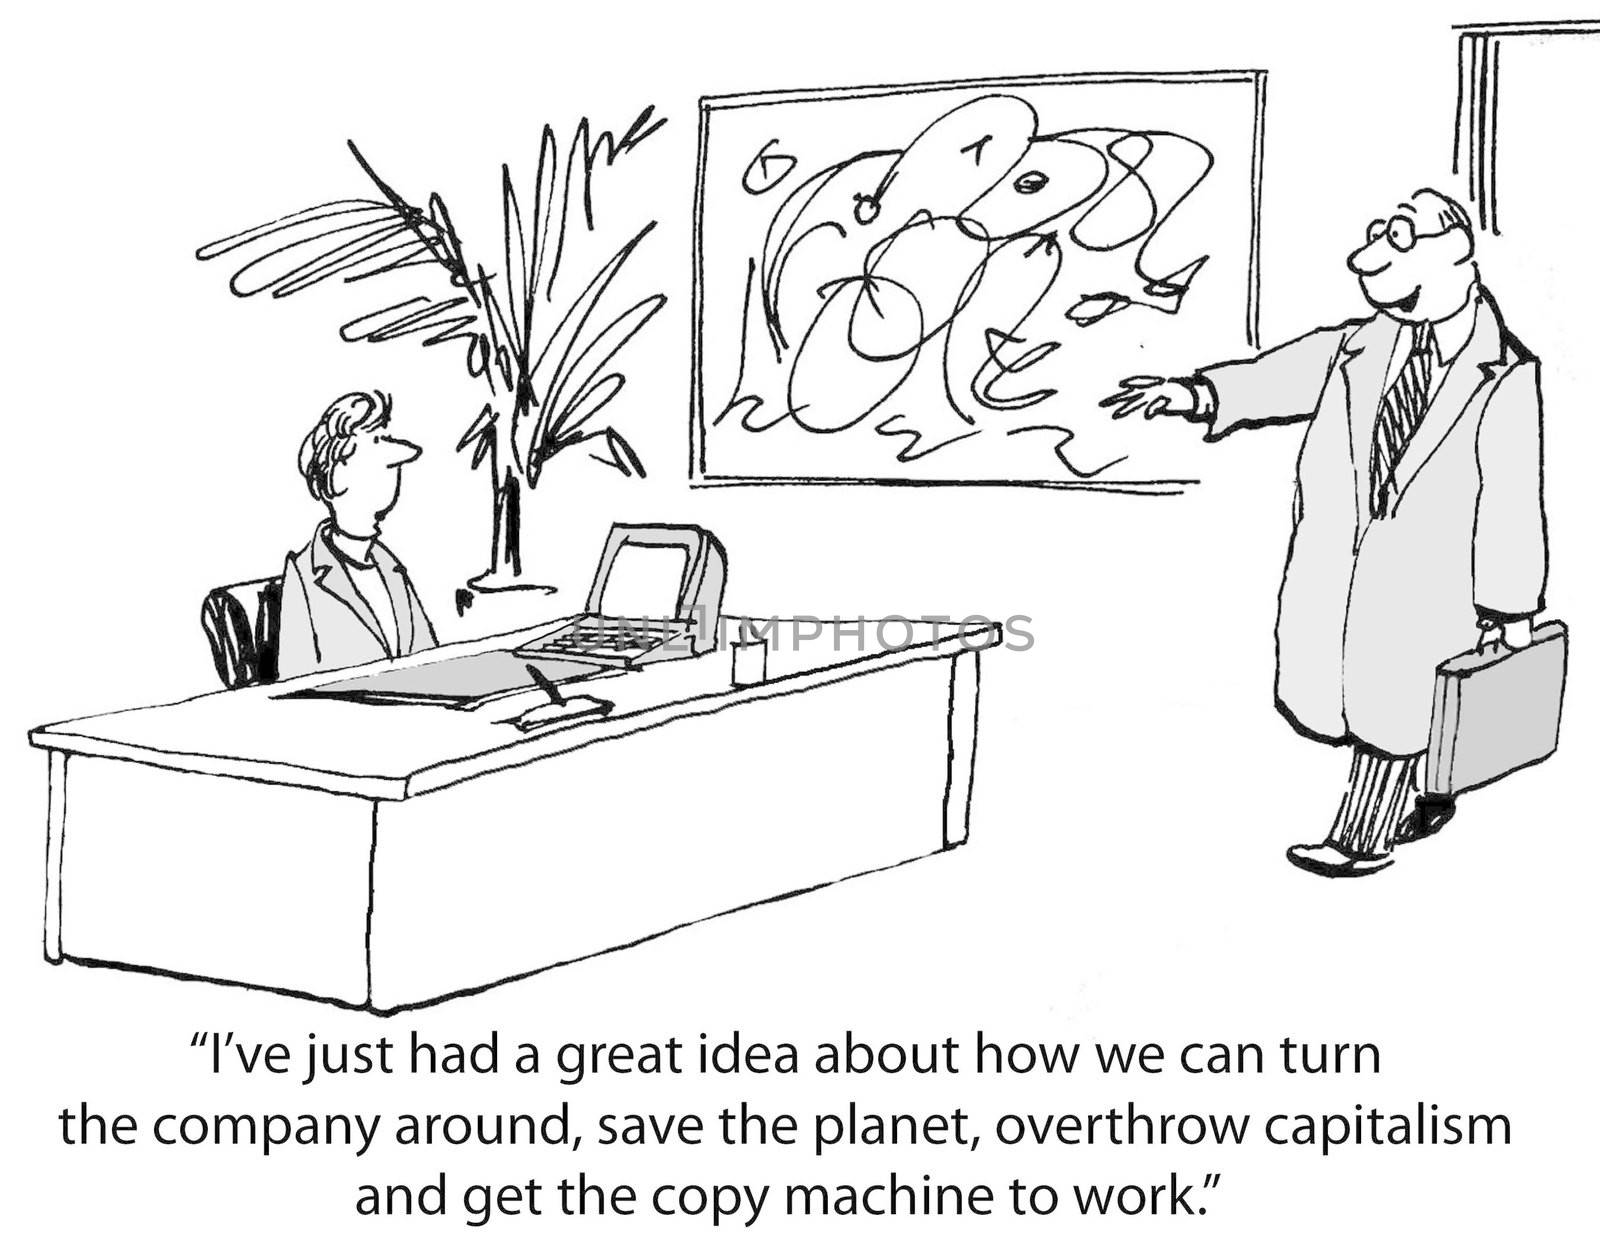 "I've just had a great idea about how we can turn the company around, save the planet, overthrow capitalism and get the copy machine to work."